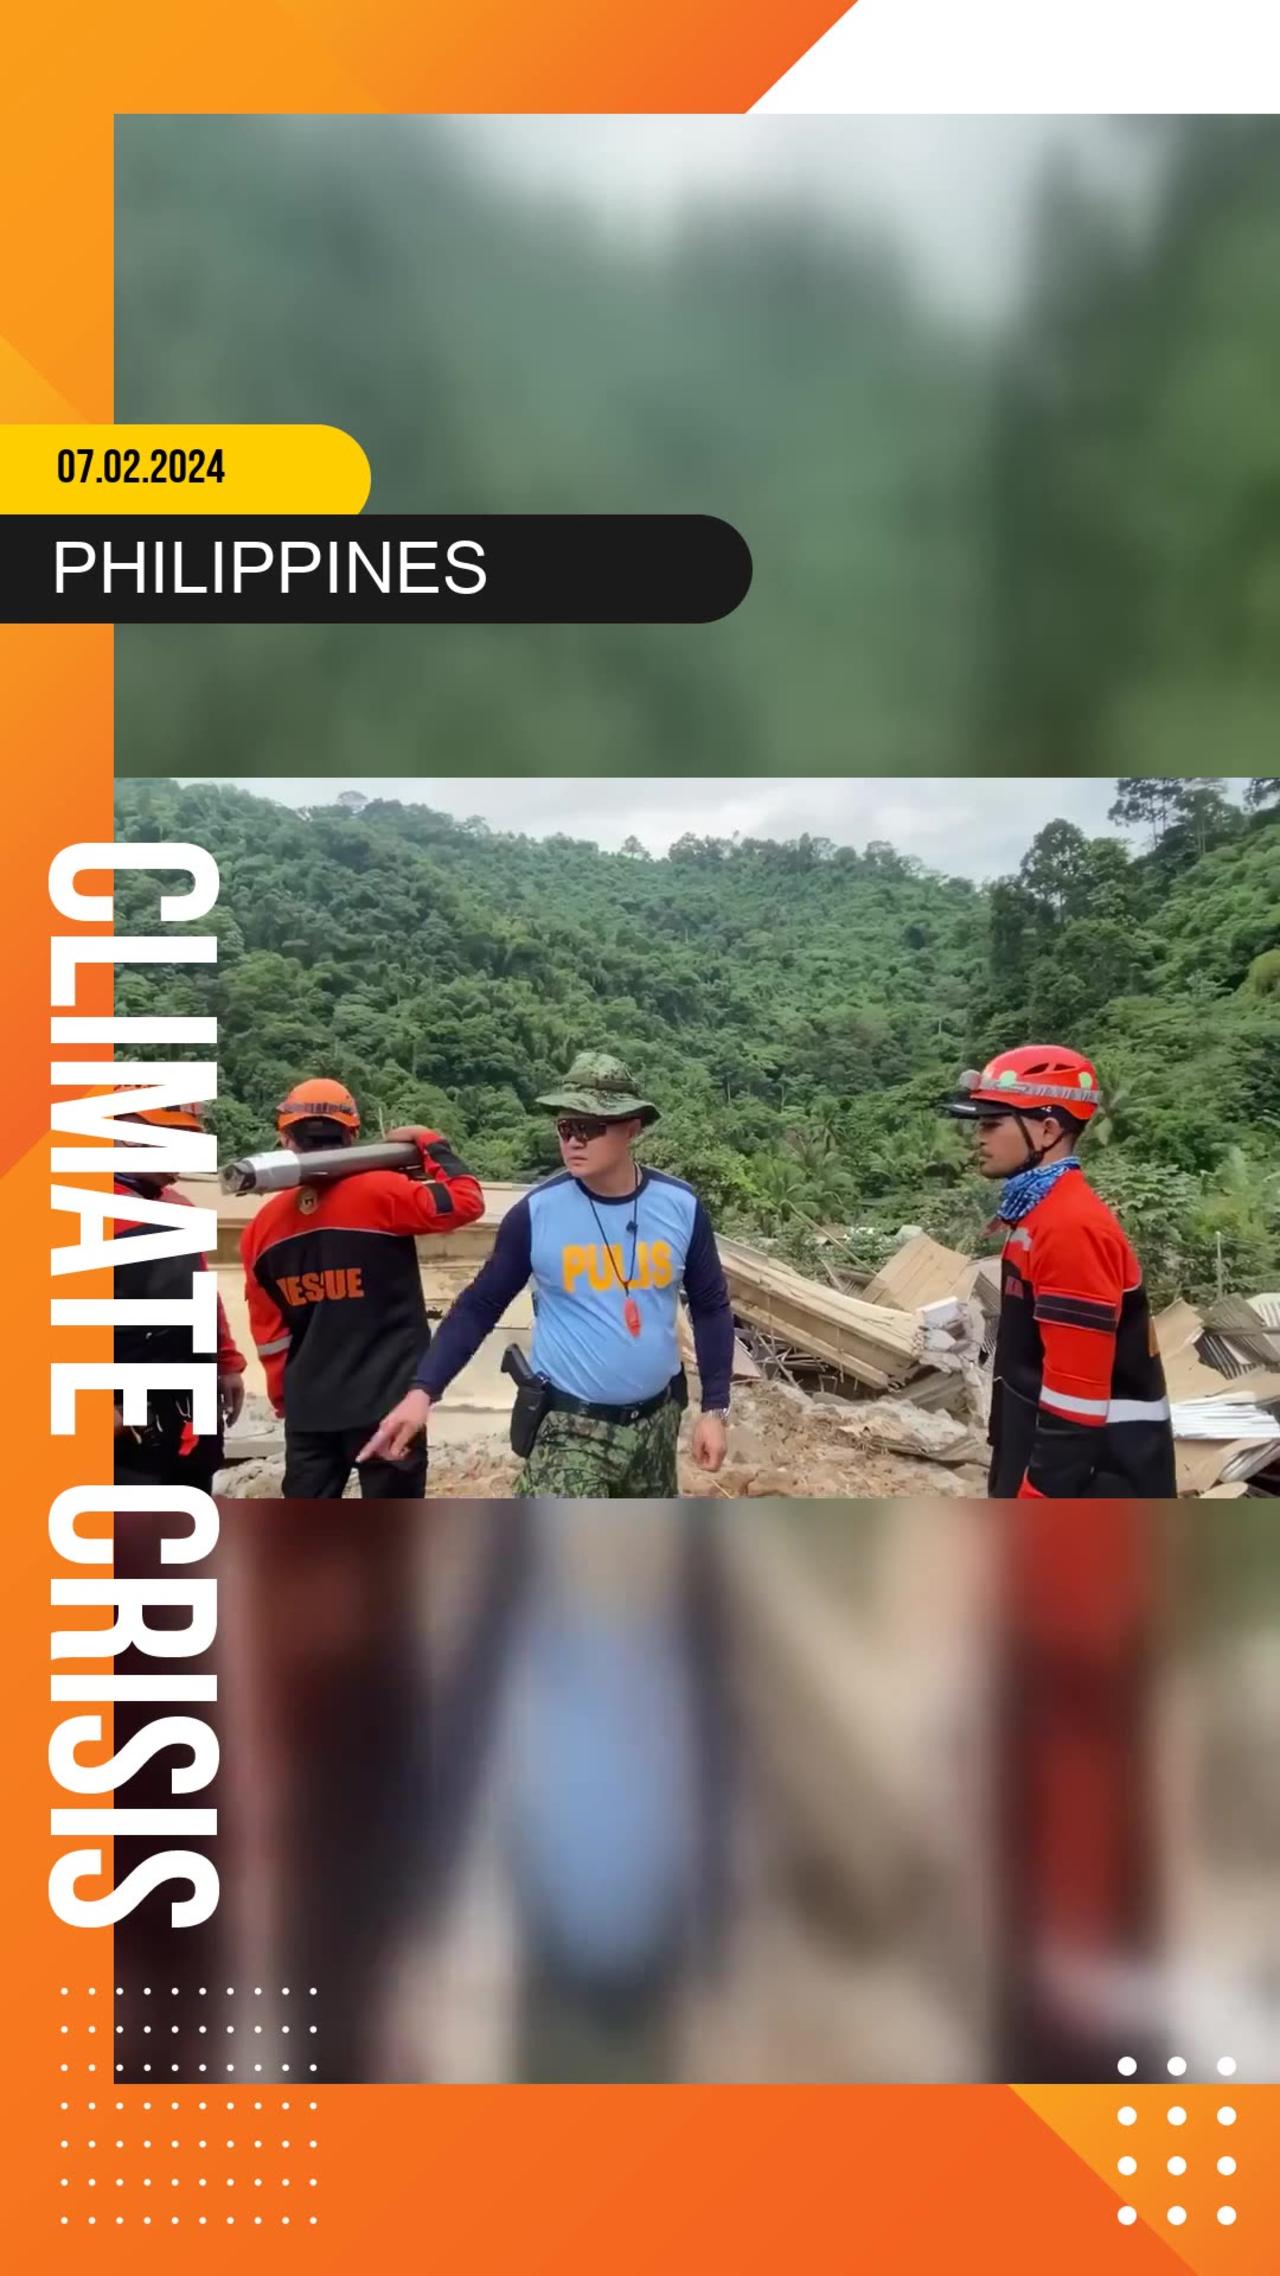 🚨 A catastrophe has occurred in the Philippines!